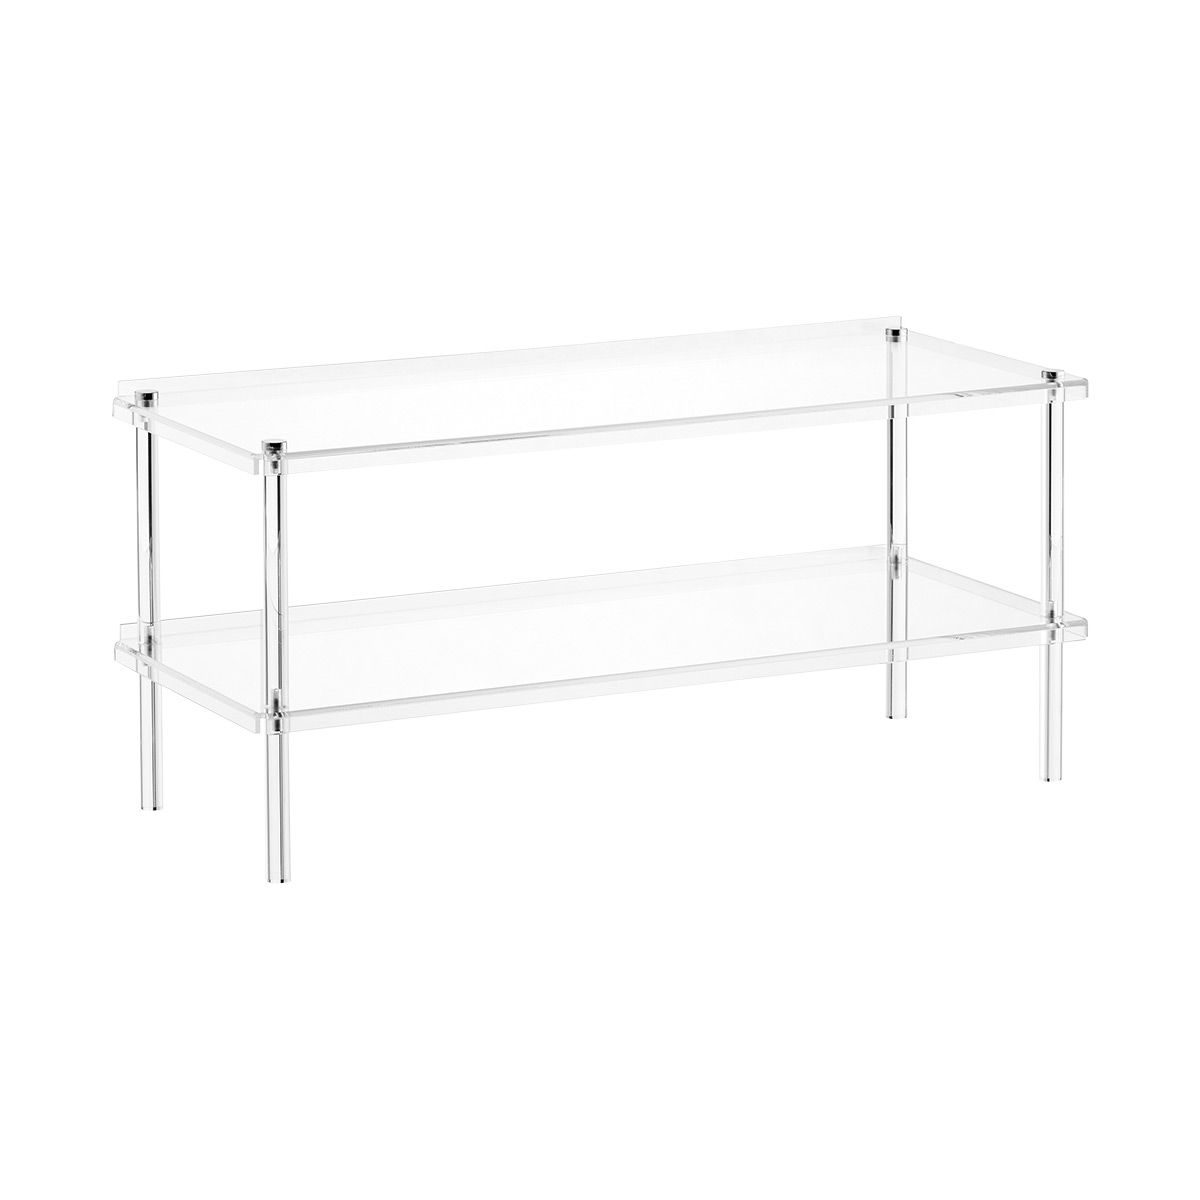 https://www.containerstore.com/catalogimages/480759/10092394-luxe-acrylic-2-tier-shoe-sh.jpg